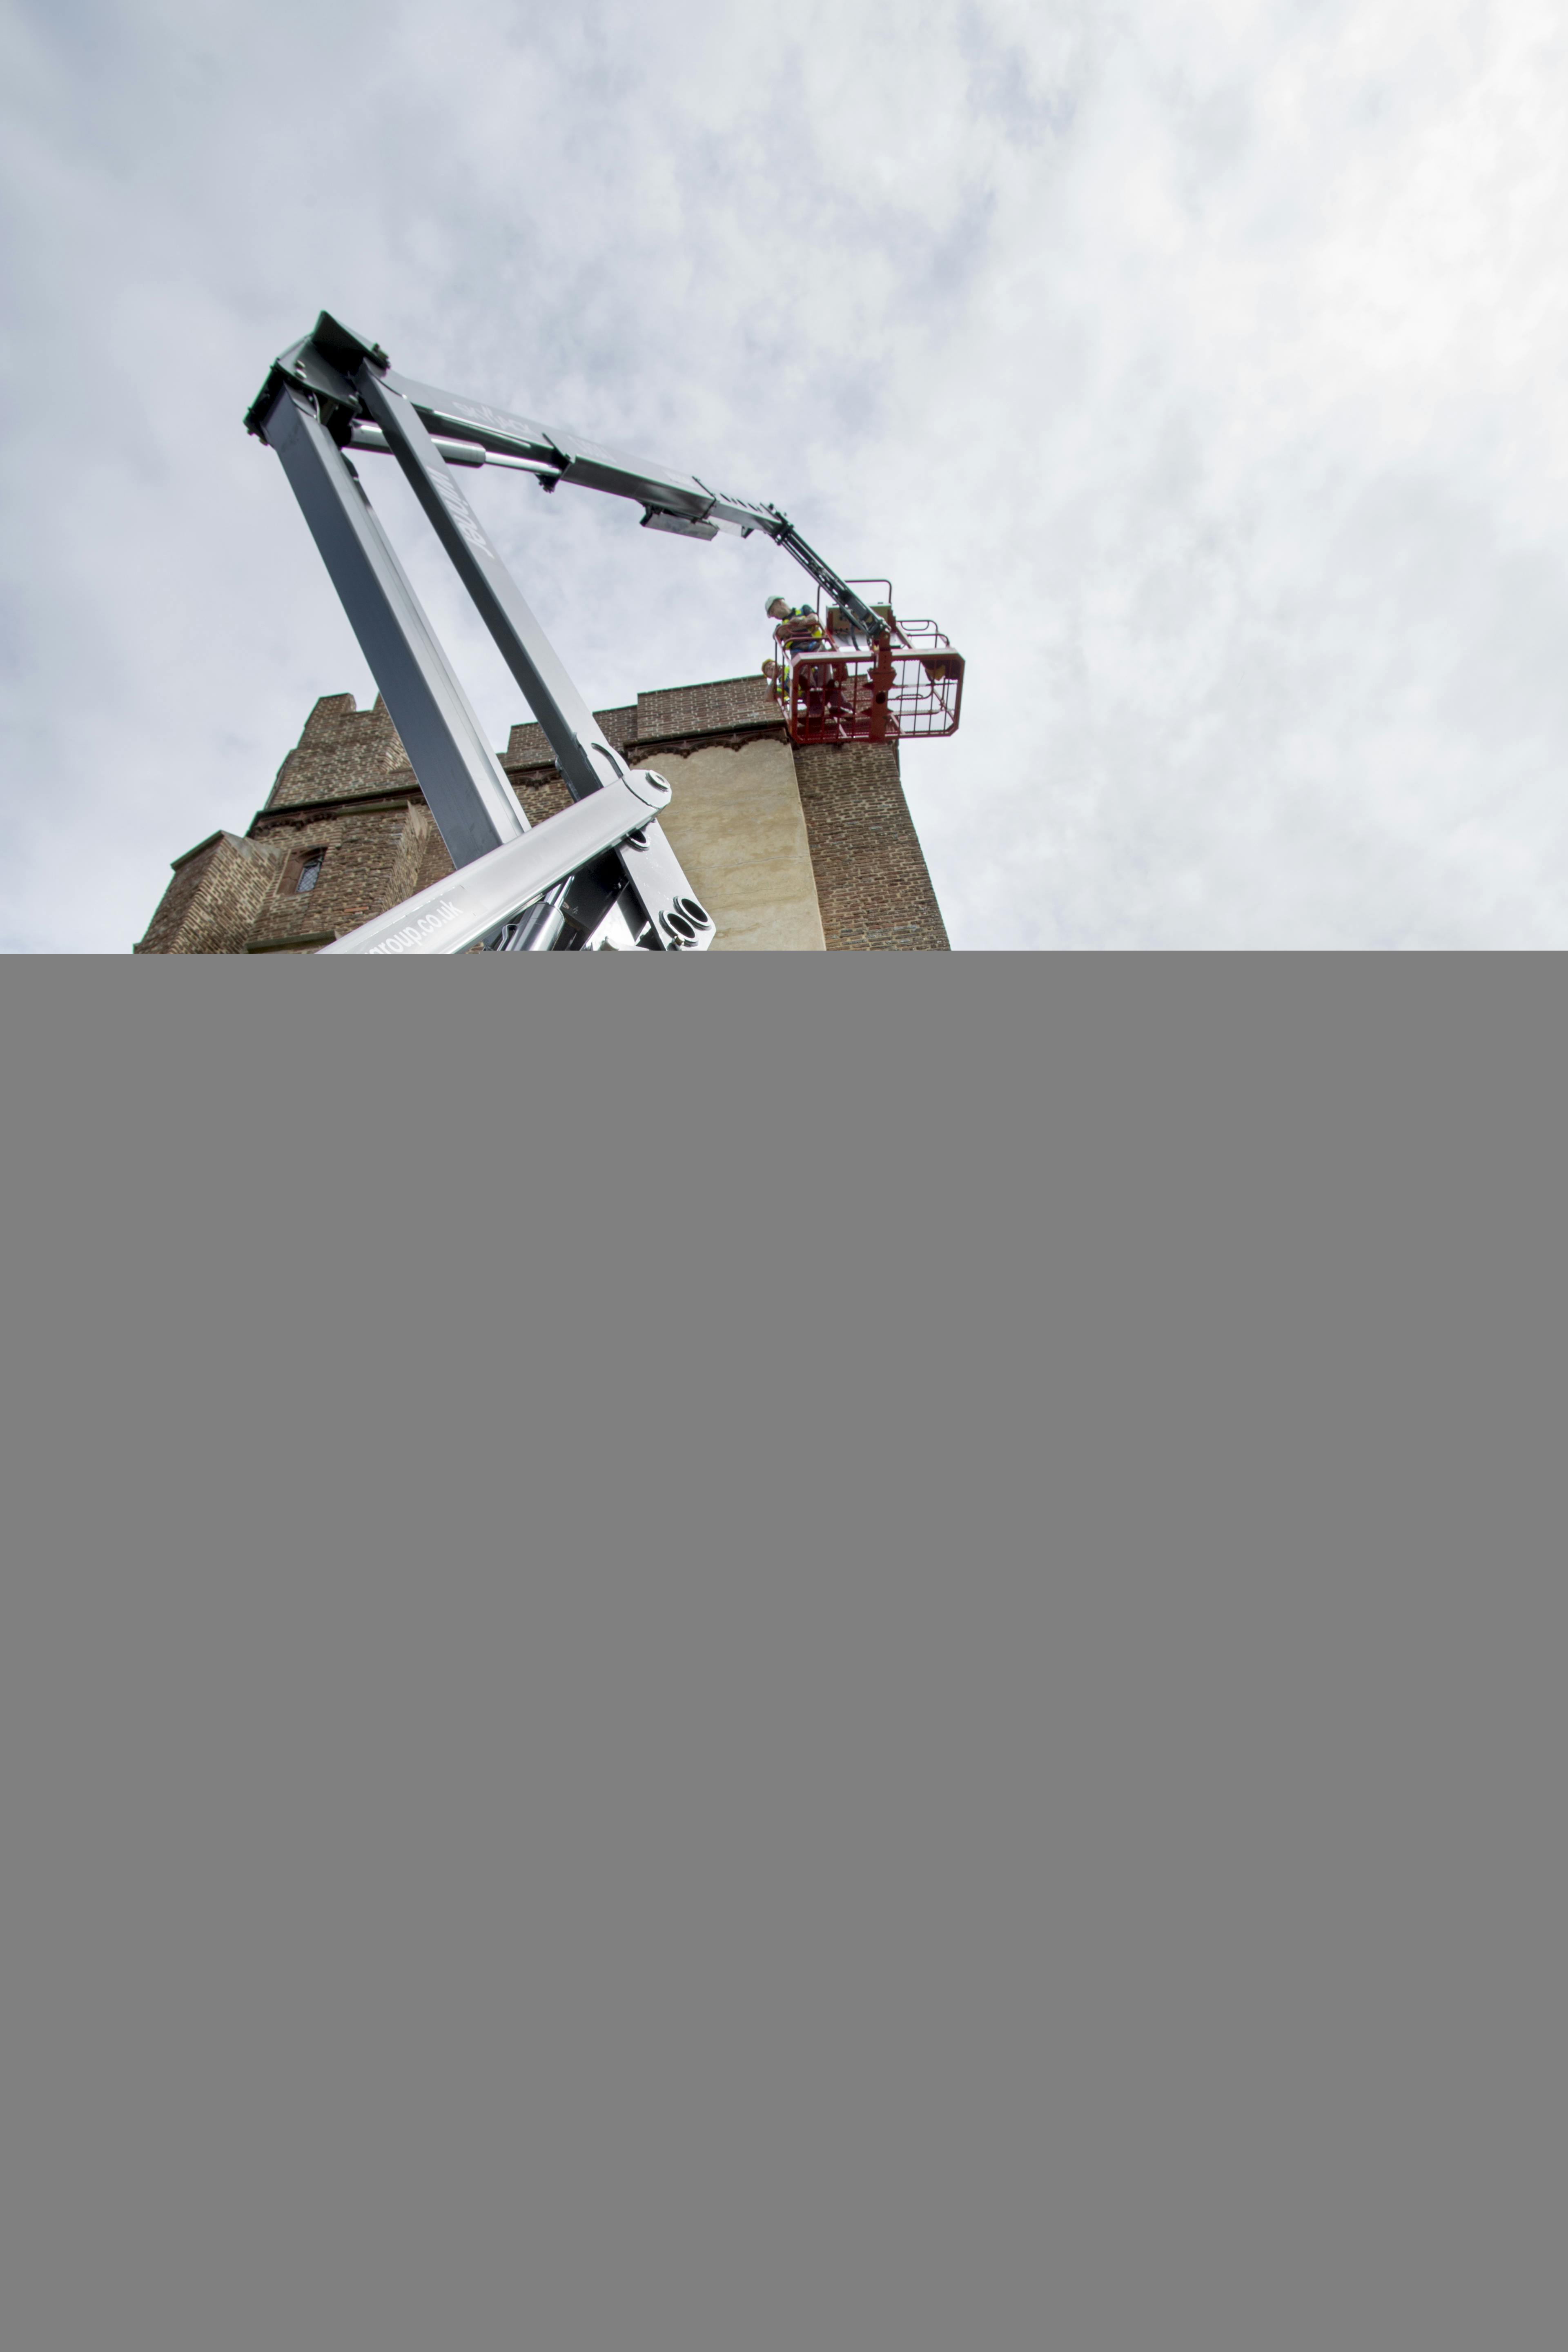 Skyjack Lift Helps Revive English Historic Site | Construction News